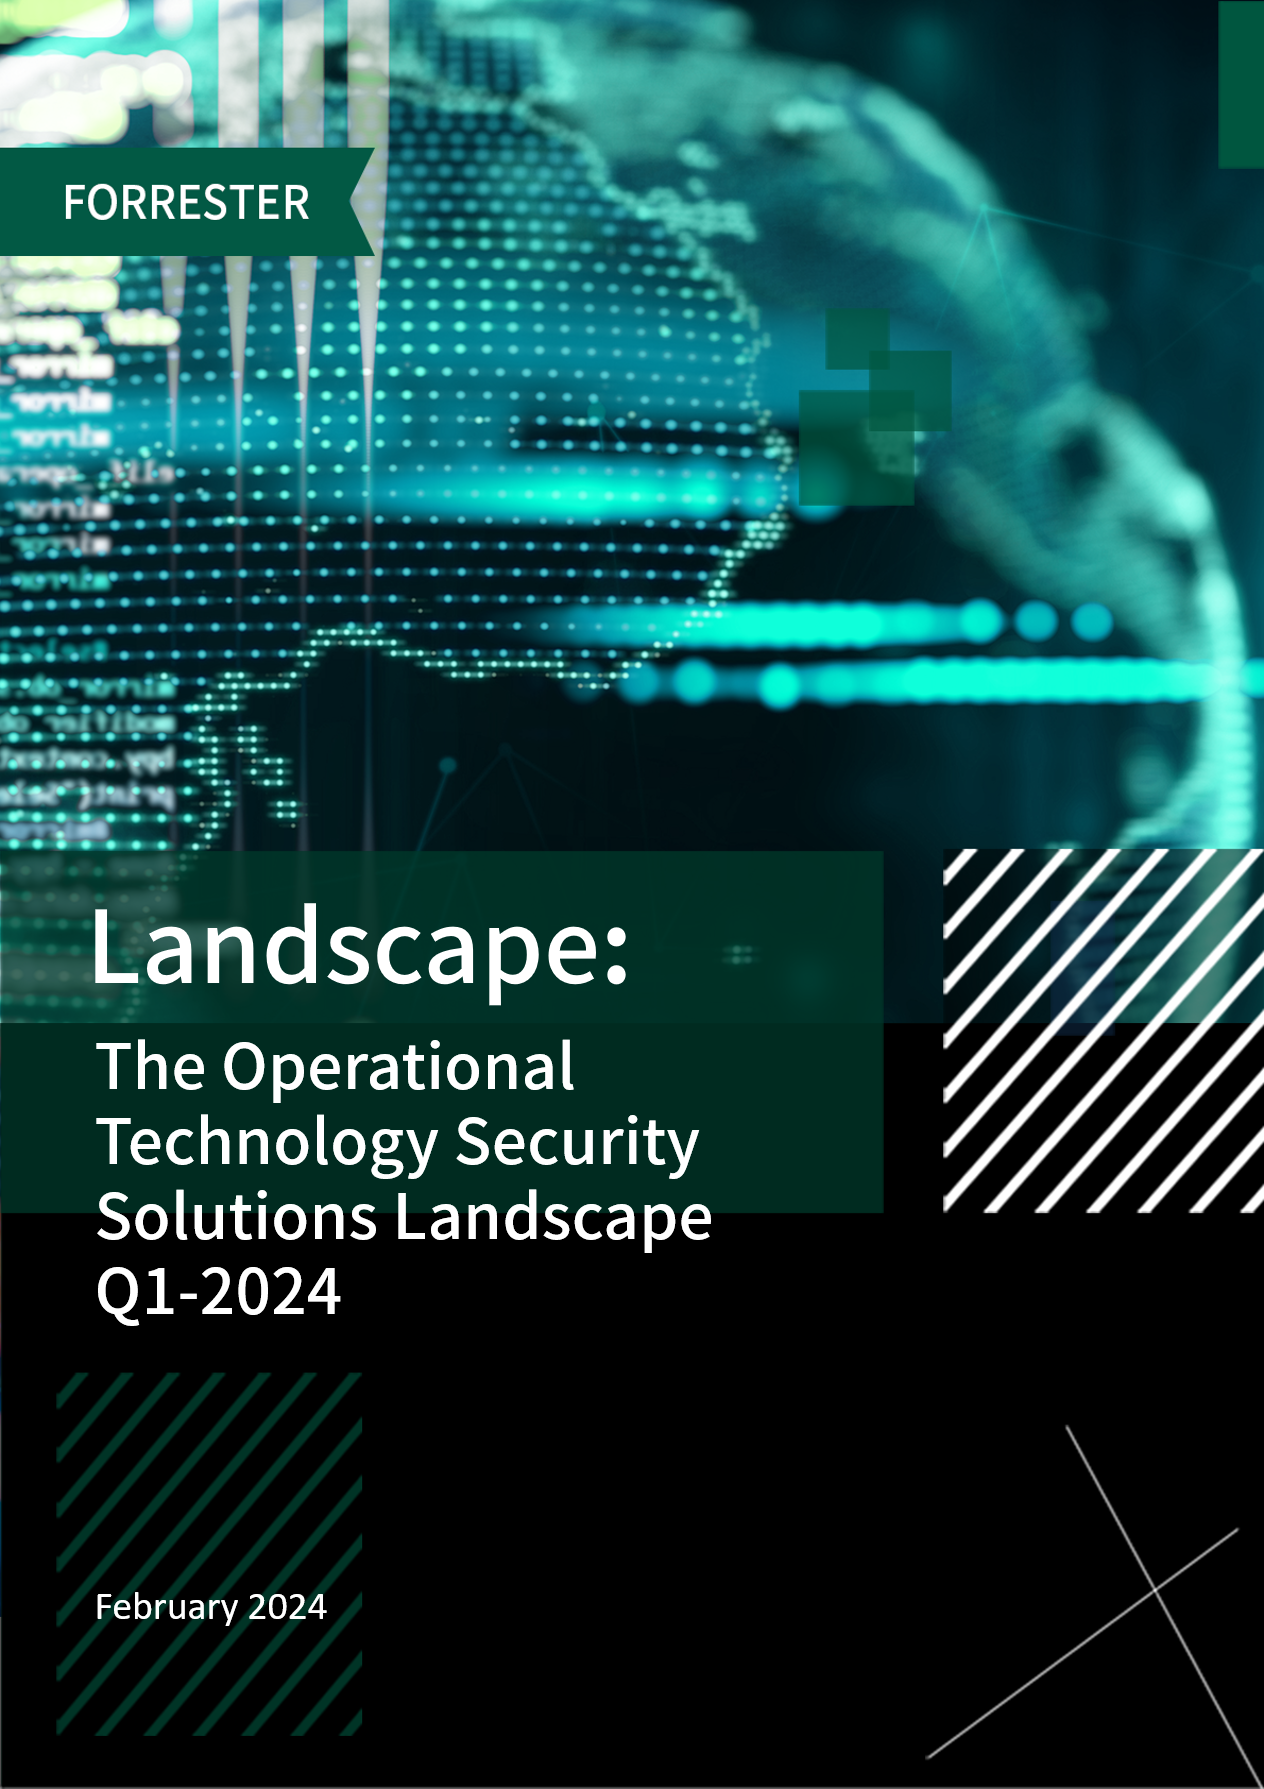 The Operational Technology Security Solutions Landscape,Q1-2024